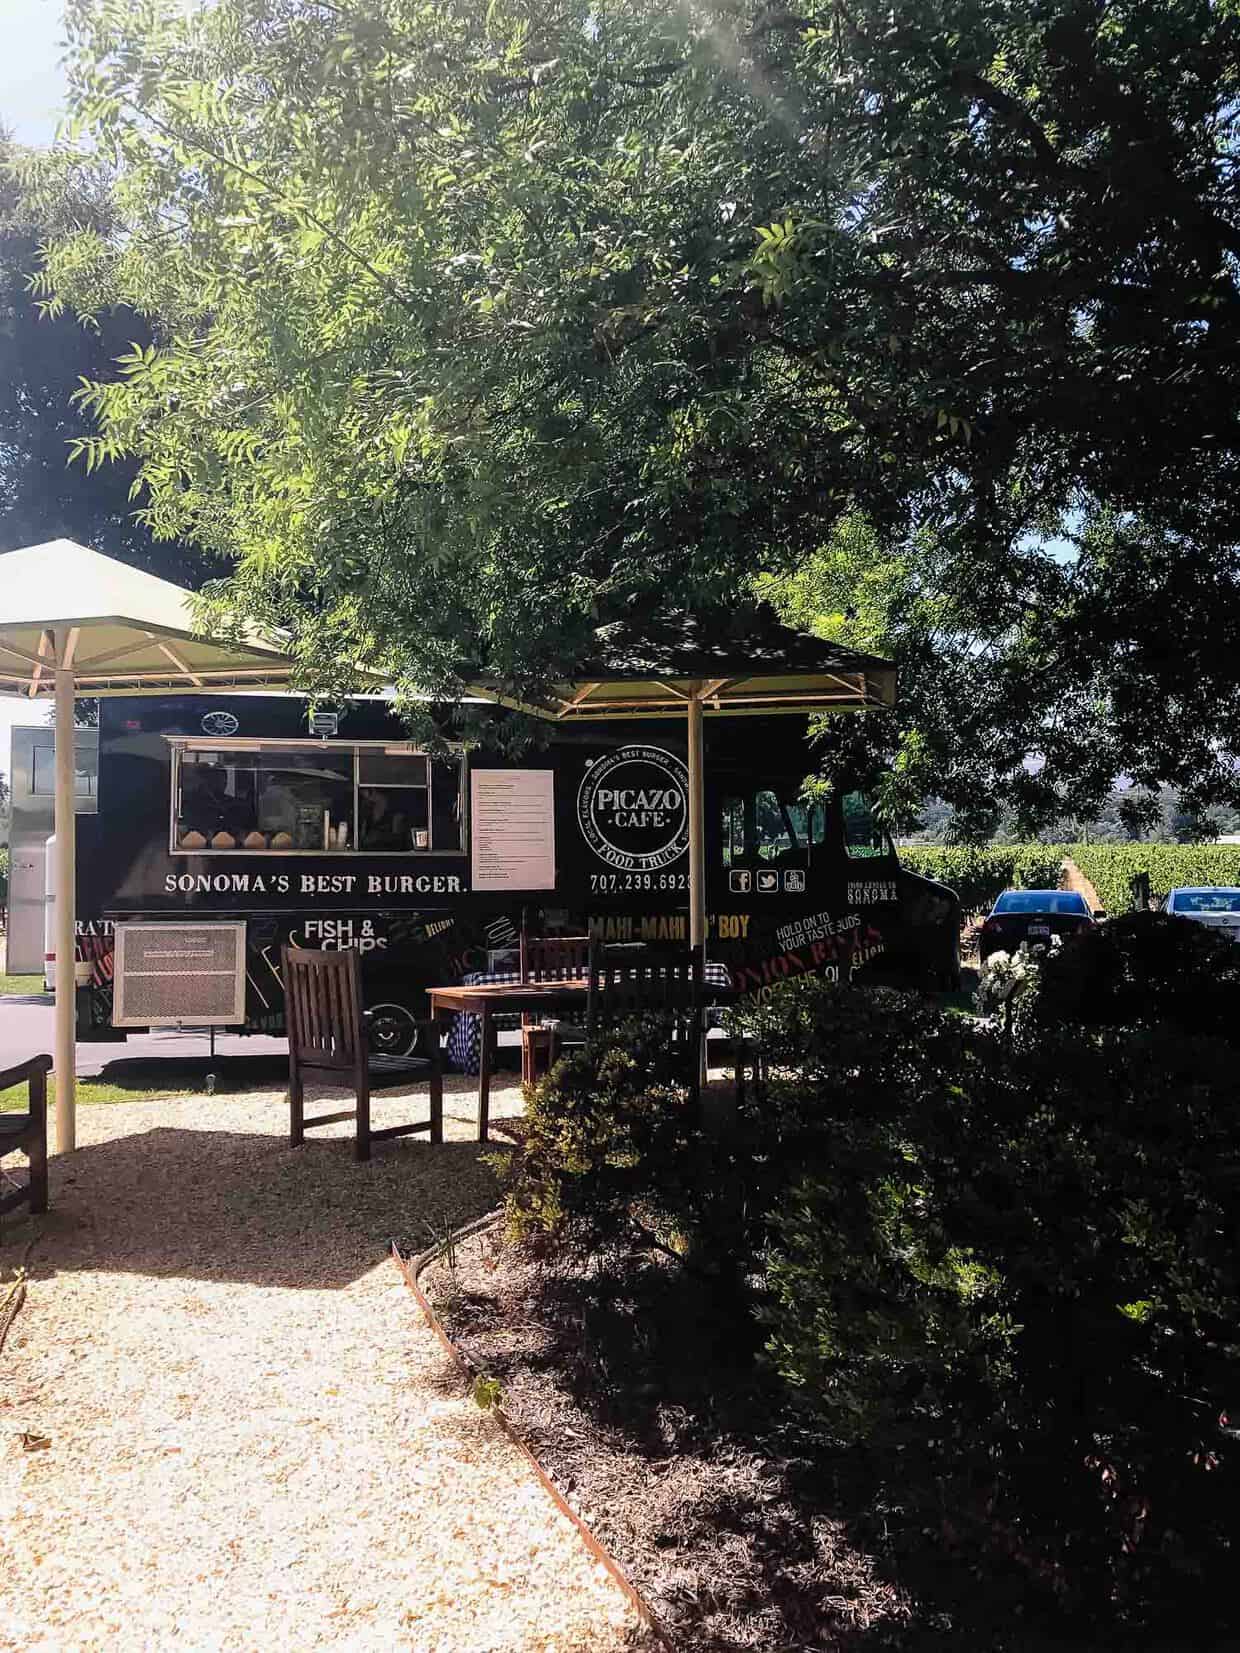 A black and white food truck parked under the shade of trees with outdoor seating.